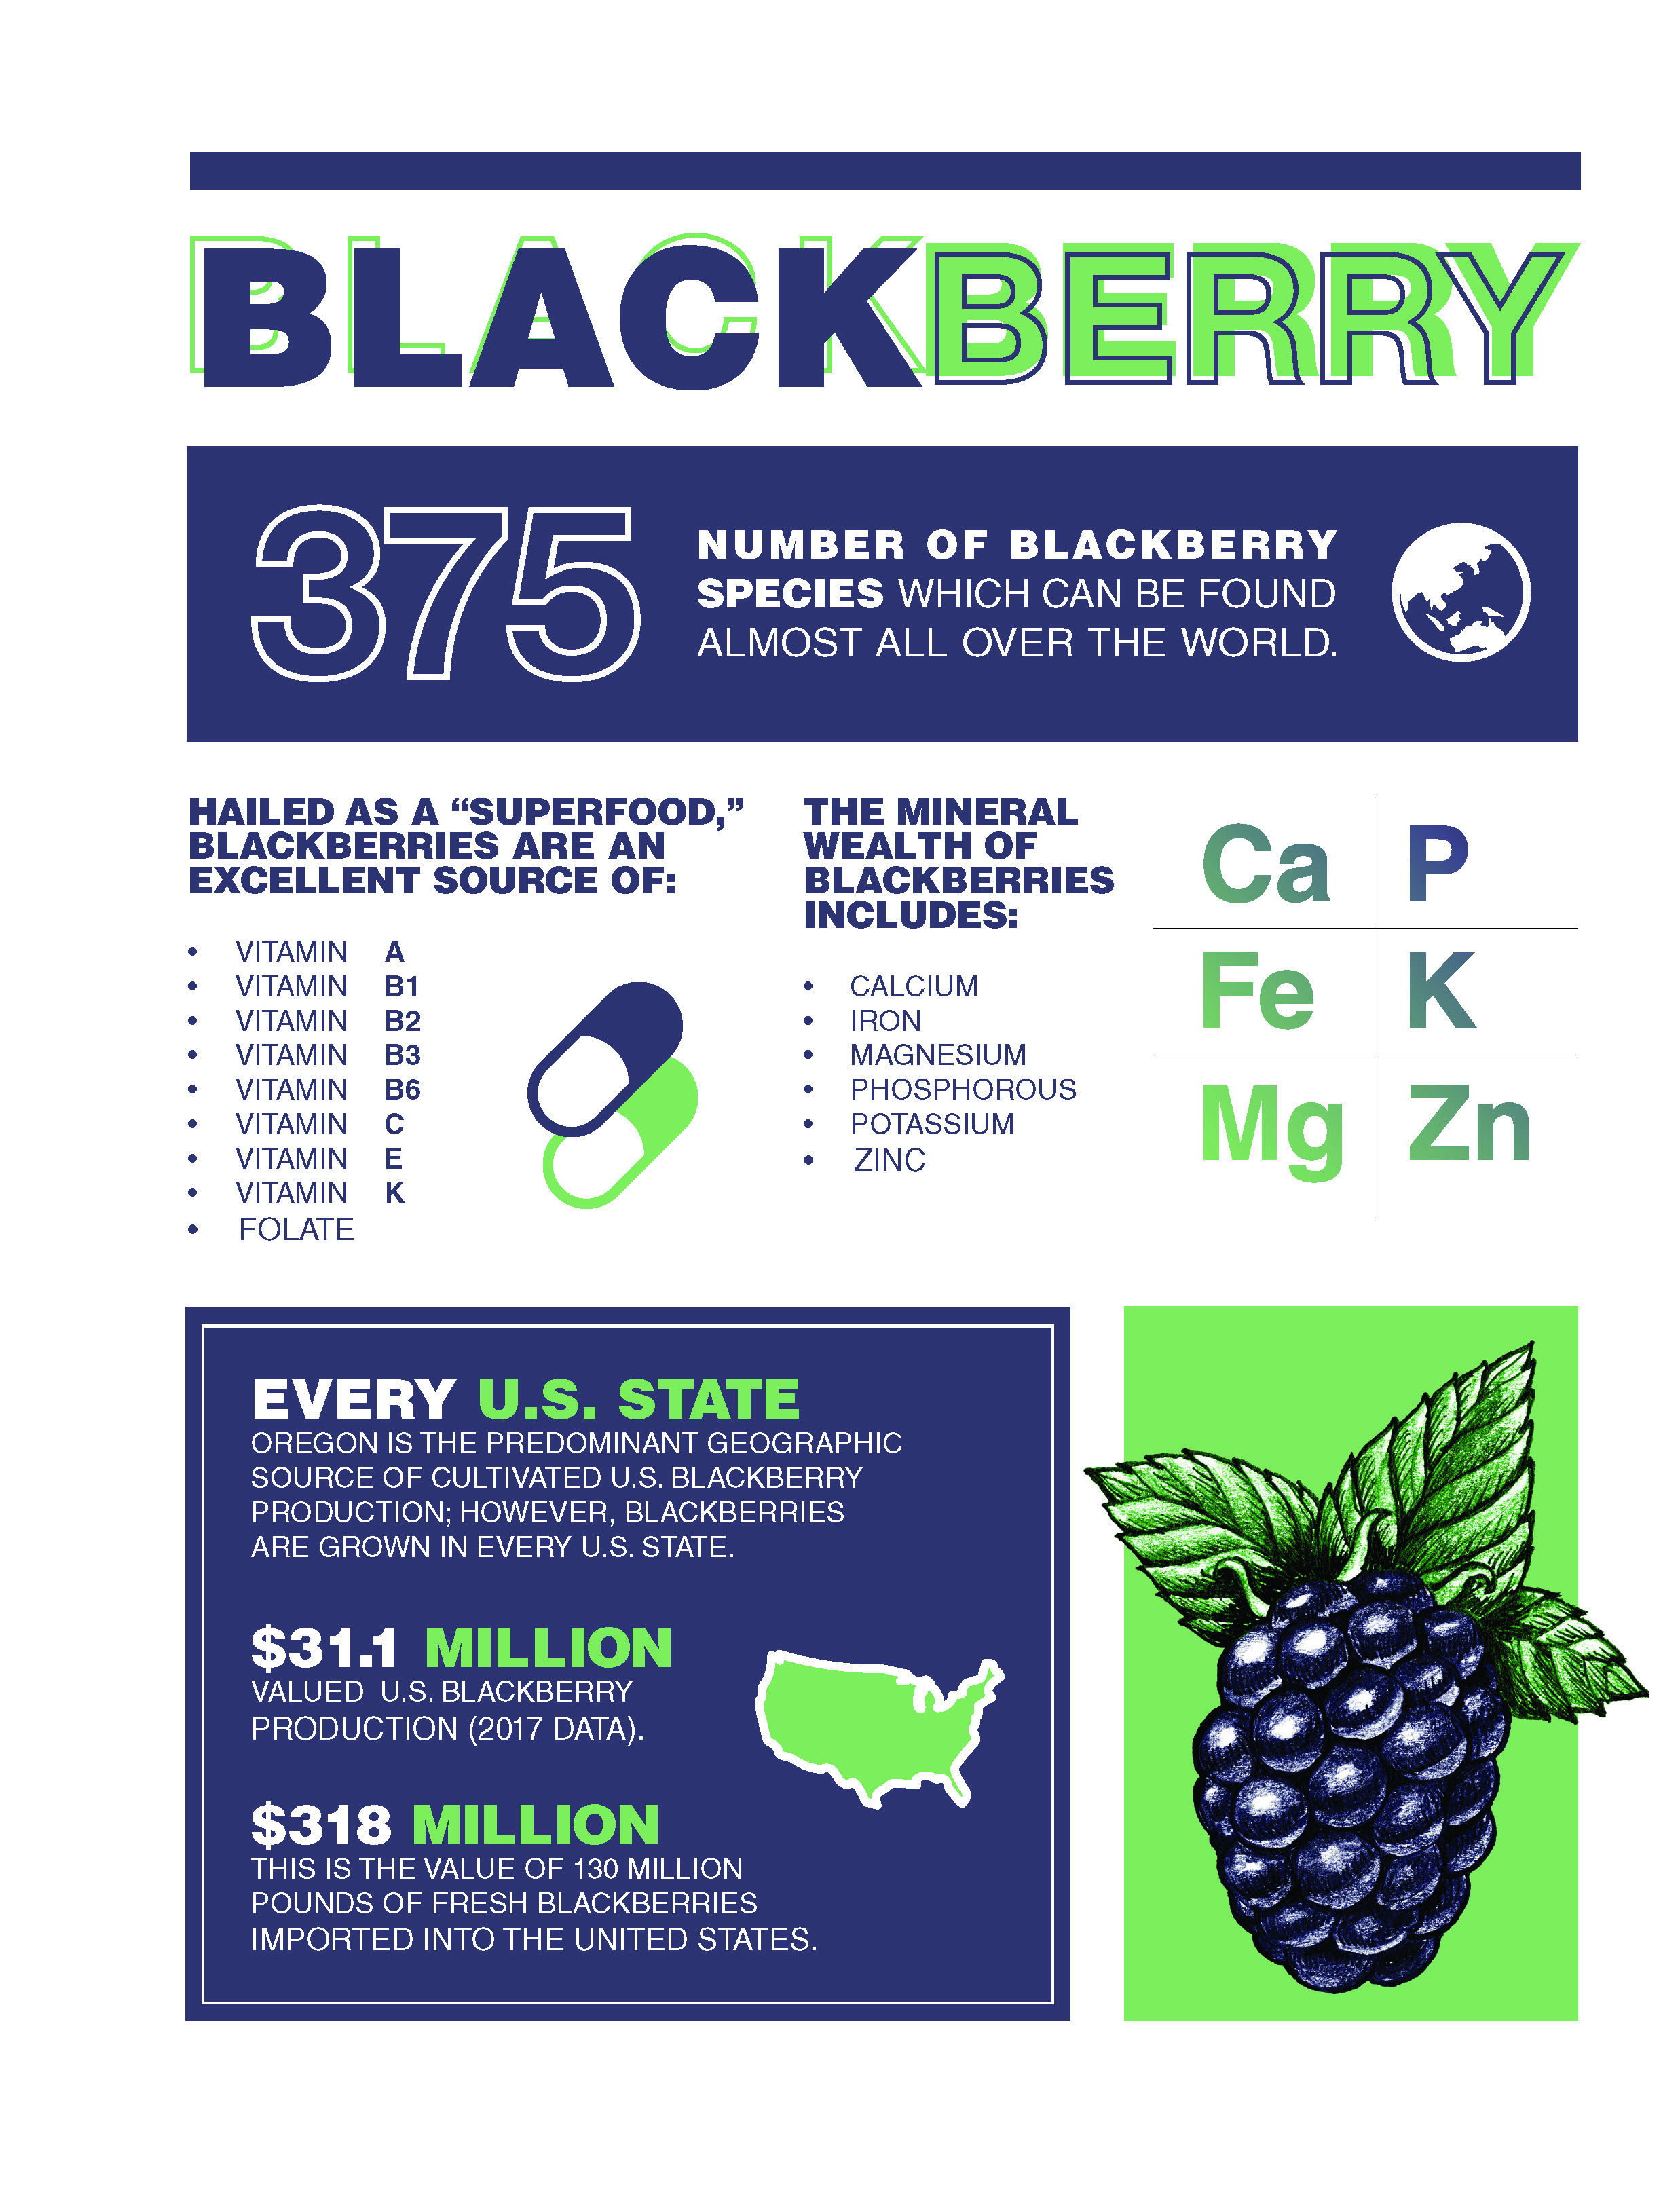 SOURCES: <a href="https://justfunfacts.com/interesting-facts-about-blackberries/" target="_blank">https://justfunfacts.com/interesting-facts-about-blackberries/</a> -- <a href="https://www.agmrc.org/commodities-products/fruits/blackberries" target="_blank">https://www.agmrc.org/commodities-products/fruits/blackberries</a>